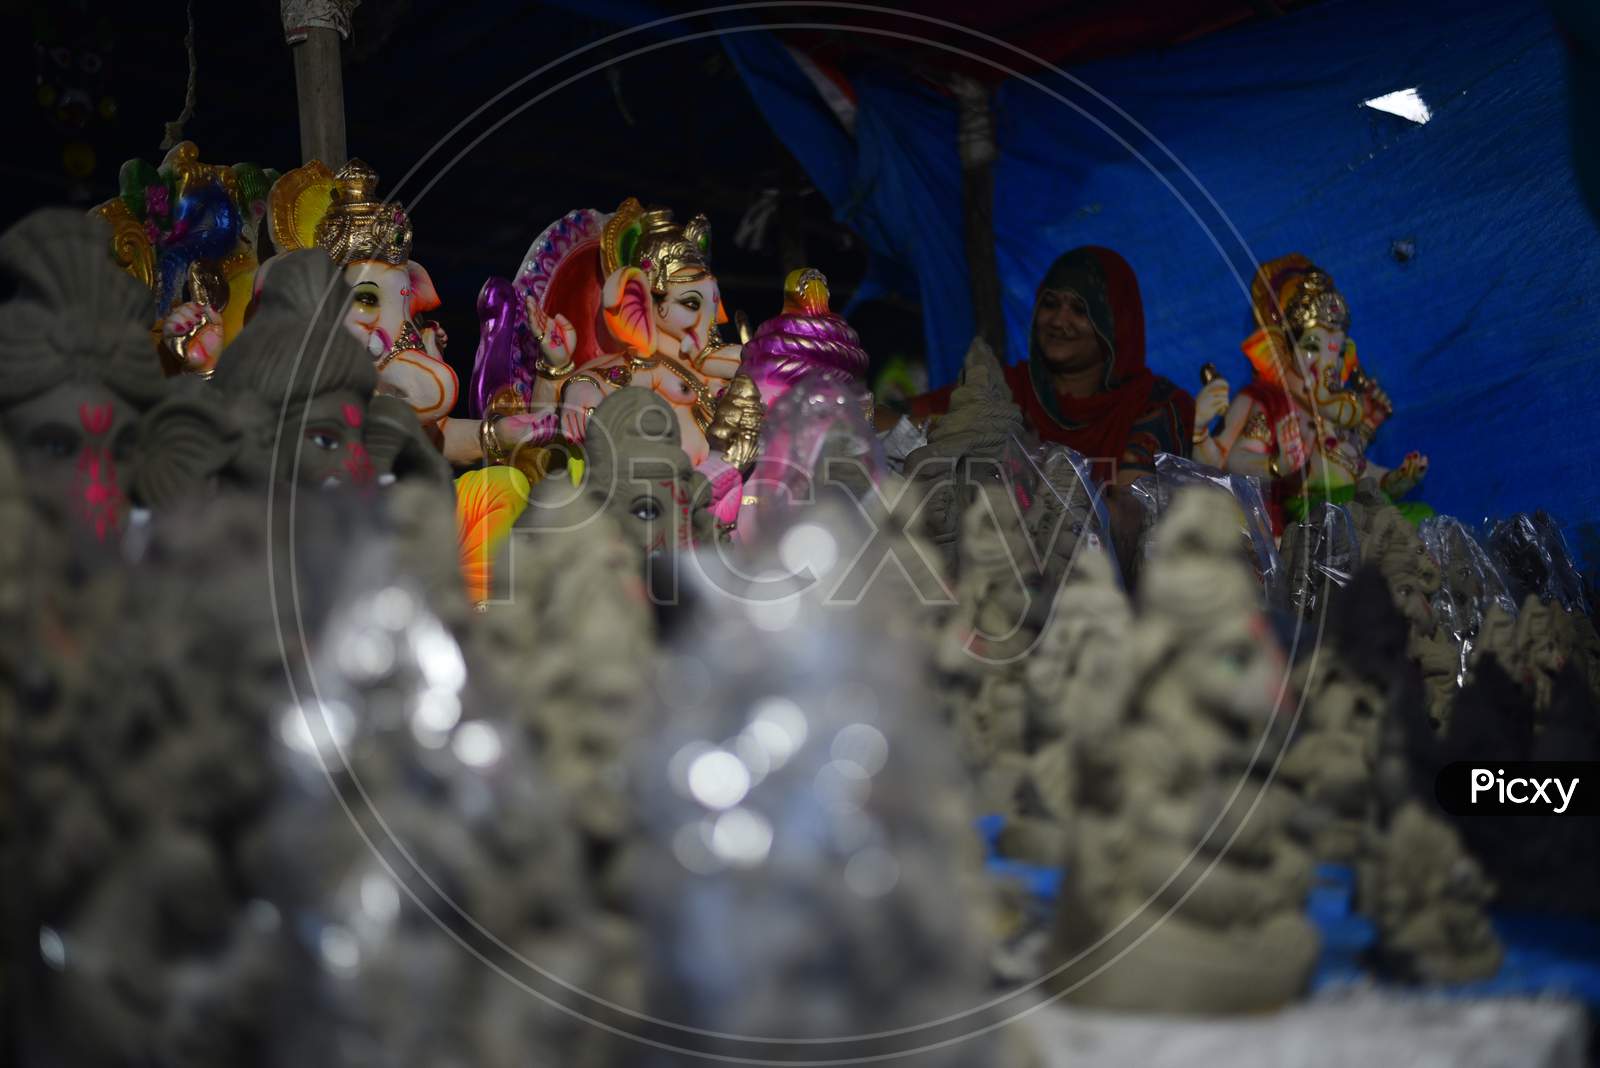 A vendor waits for customers to sell the Idols of hindu deity, Lord Ganesh ahead of Ganesh Chaturthi festival in Hyderabad, August 21, 2020.